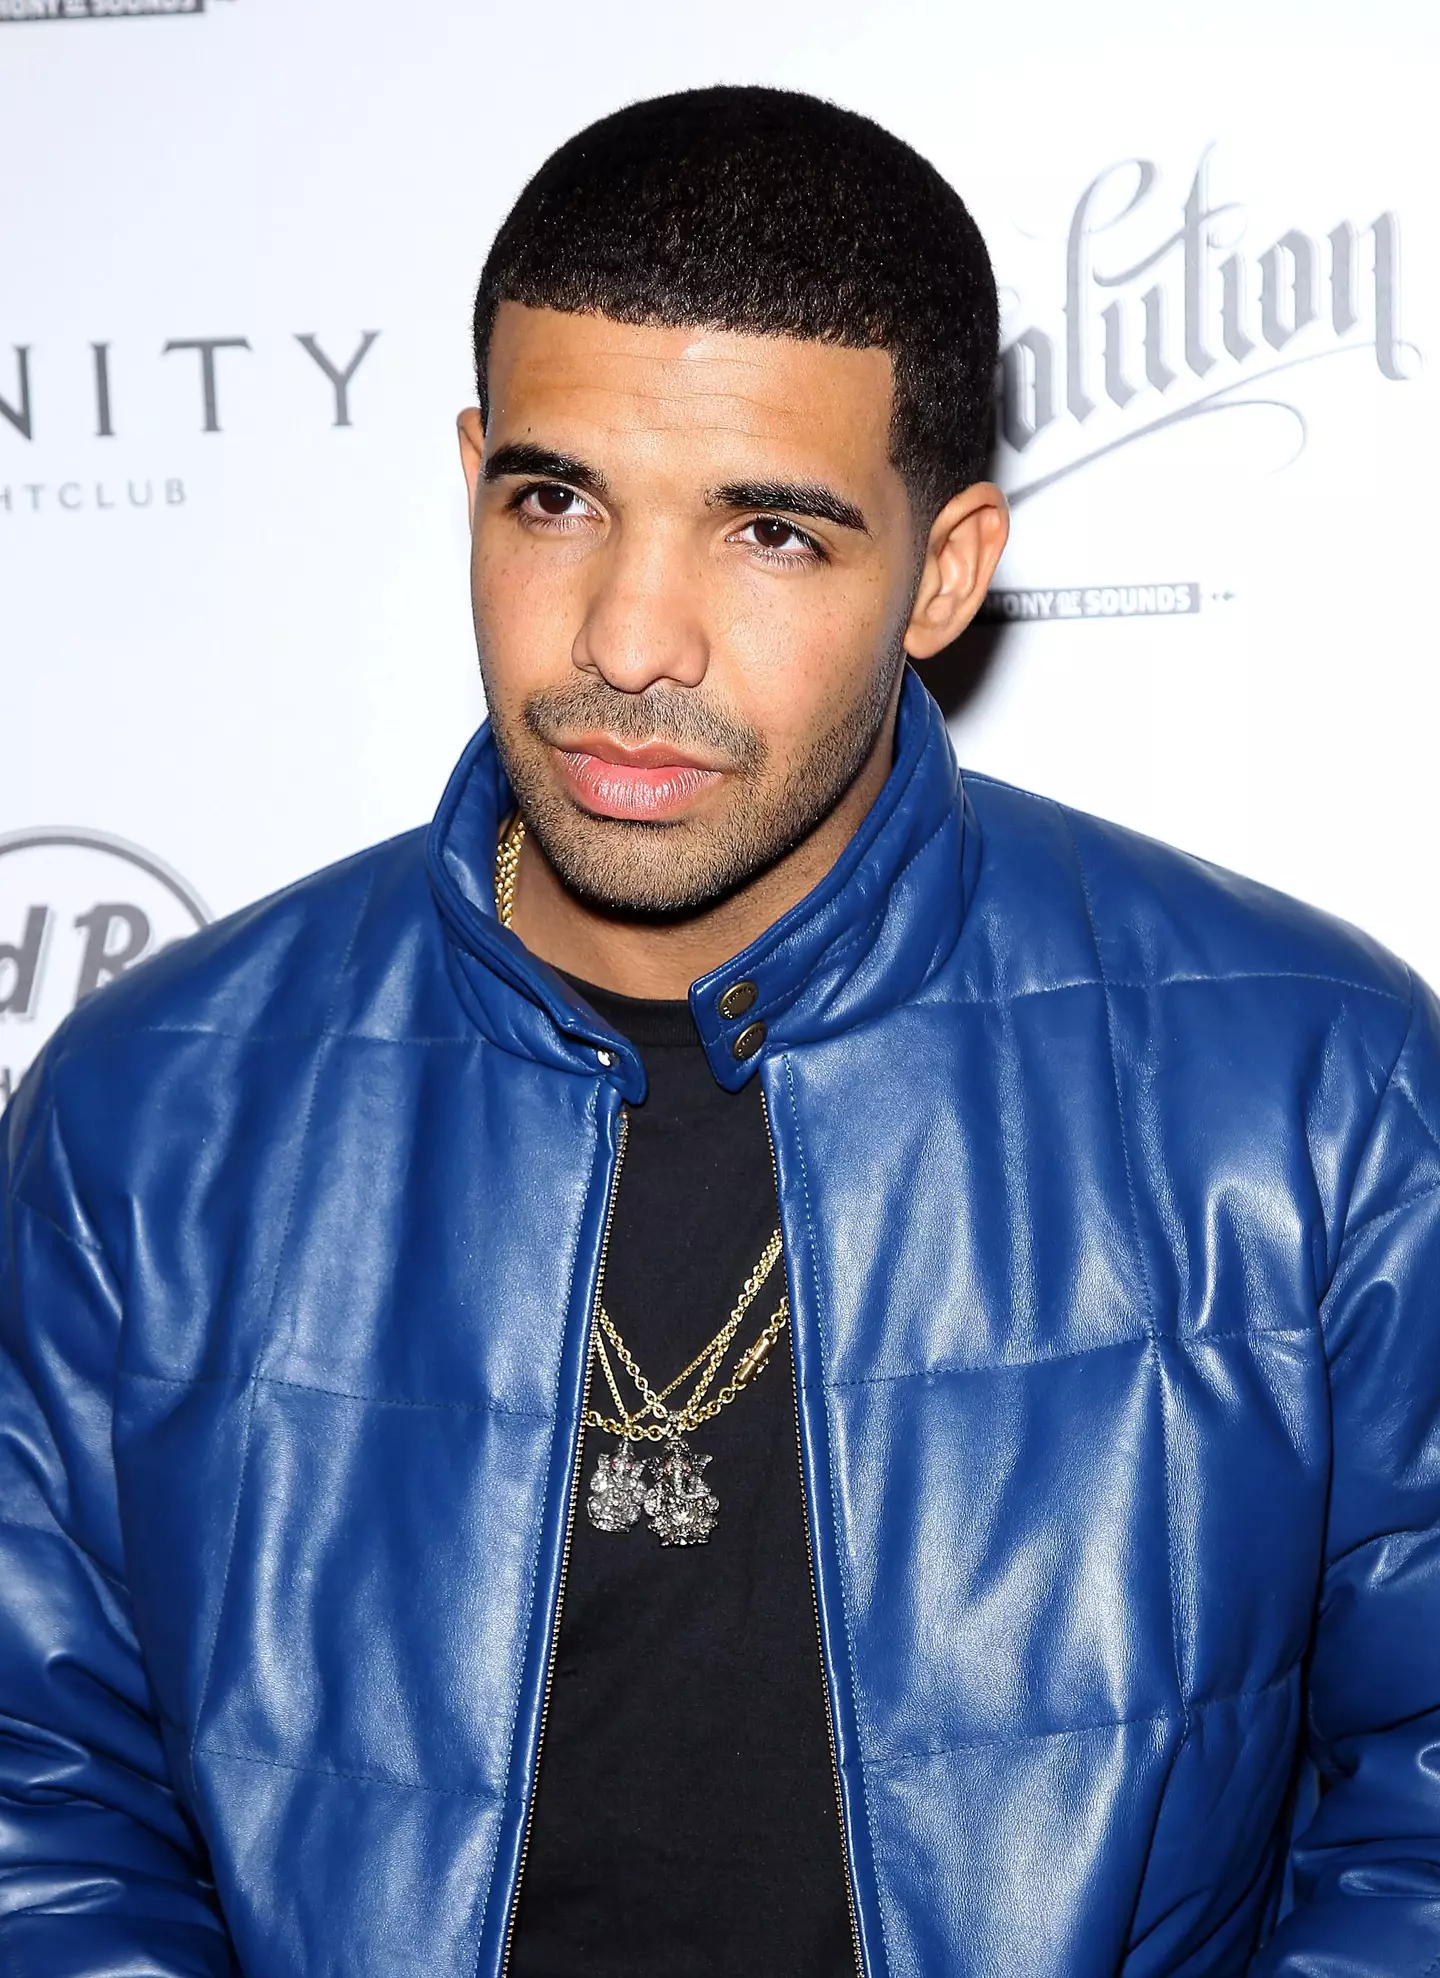 Unfortunately for Drake, his braggy post about an eye-wateringly expensive watch has backfired.